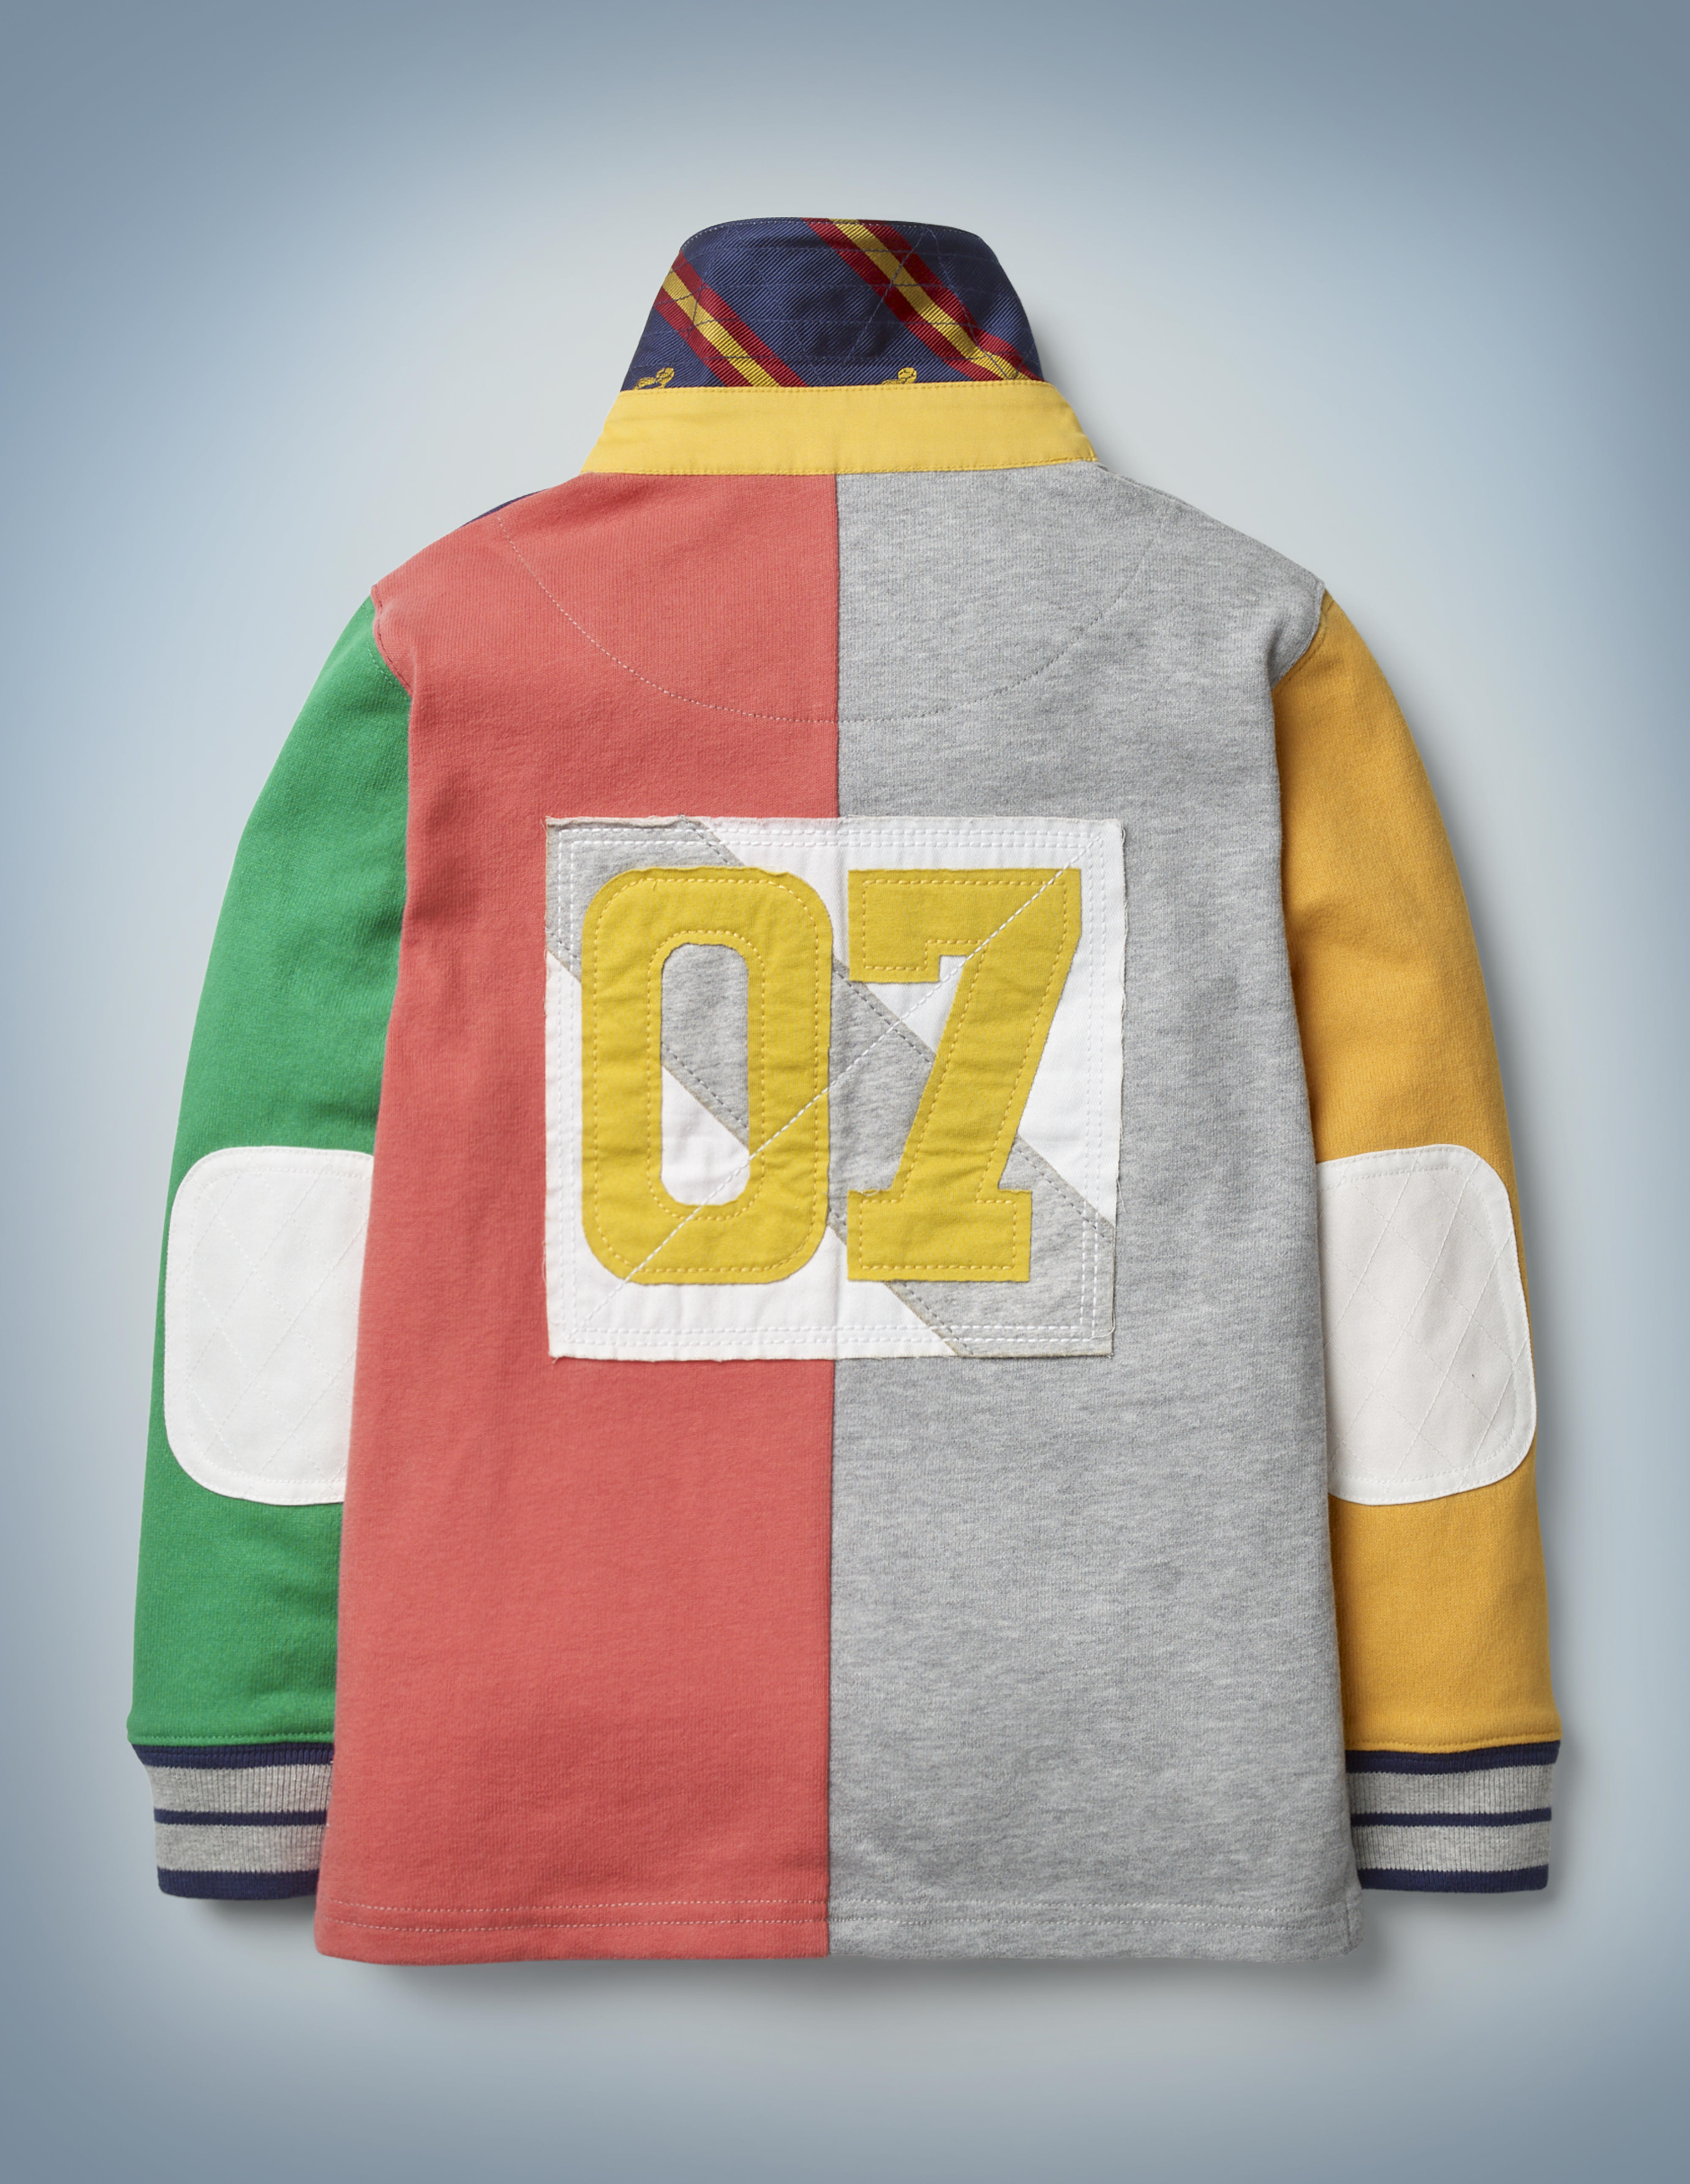 This view of the back of the Mini Boden Hogwarts Rugby Shirt, multi-color, shows a patch featuring Harry Potter’s Quidditch number: 07. It retails at £30.